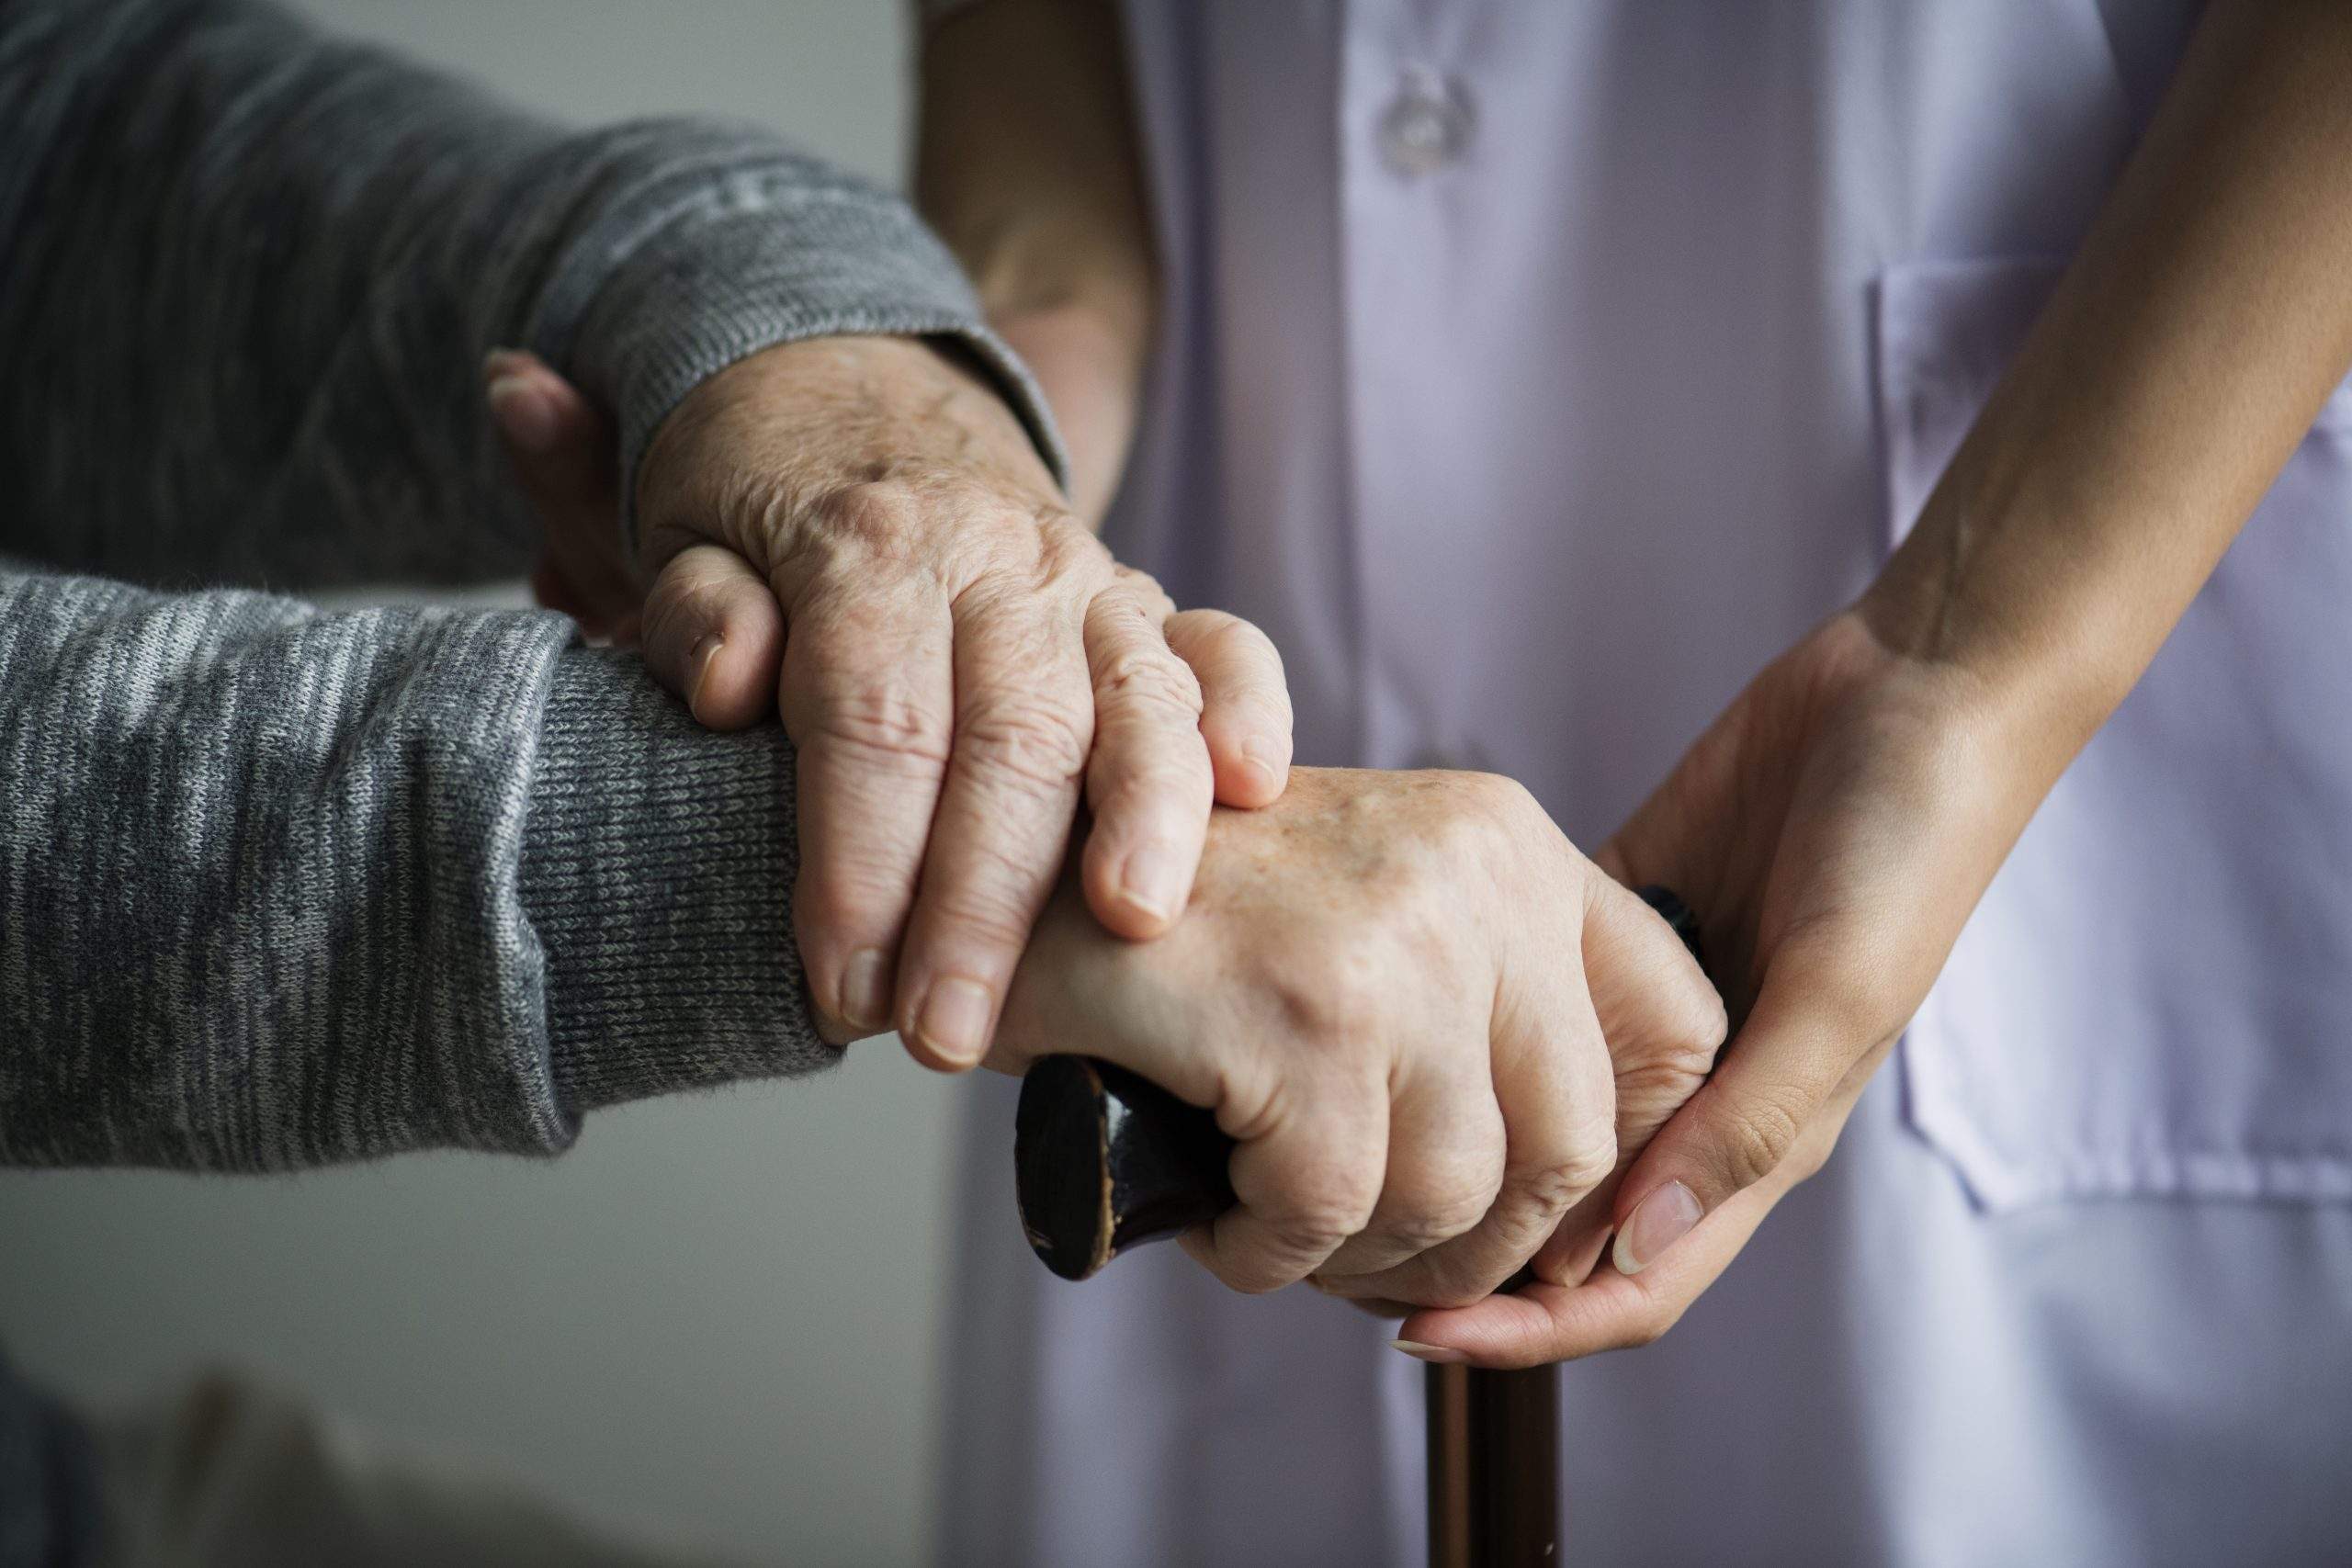 Care home nurse holding hands with elderly patient